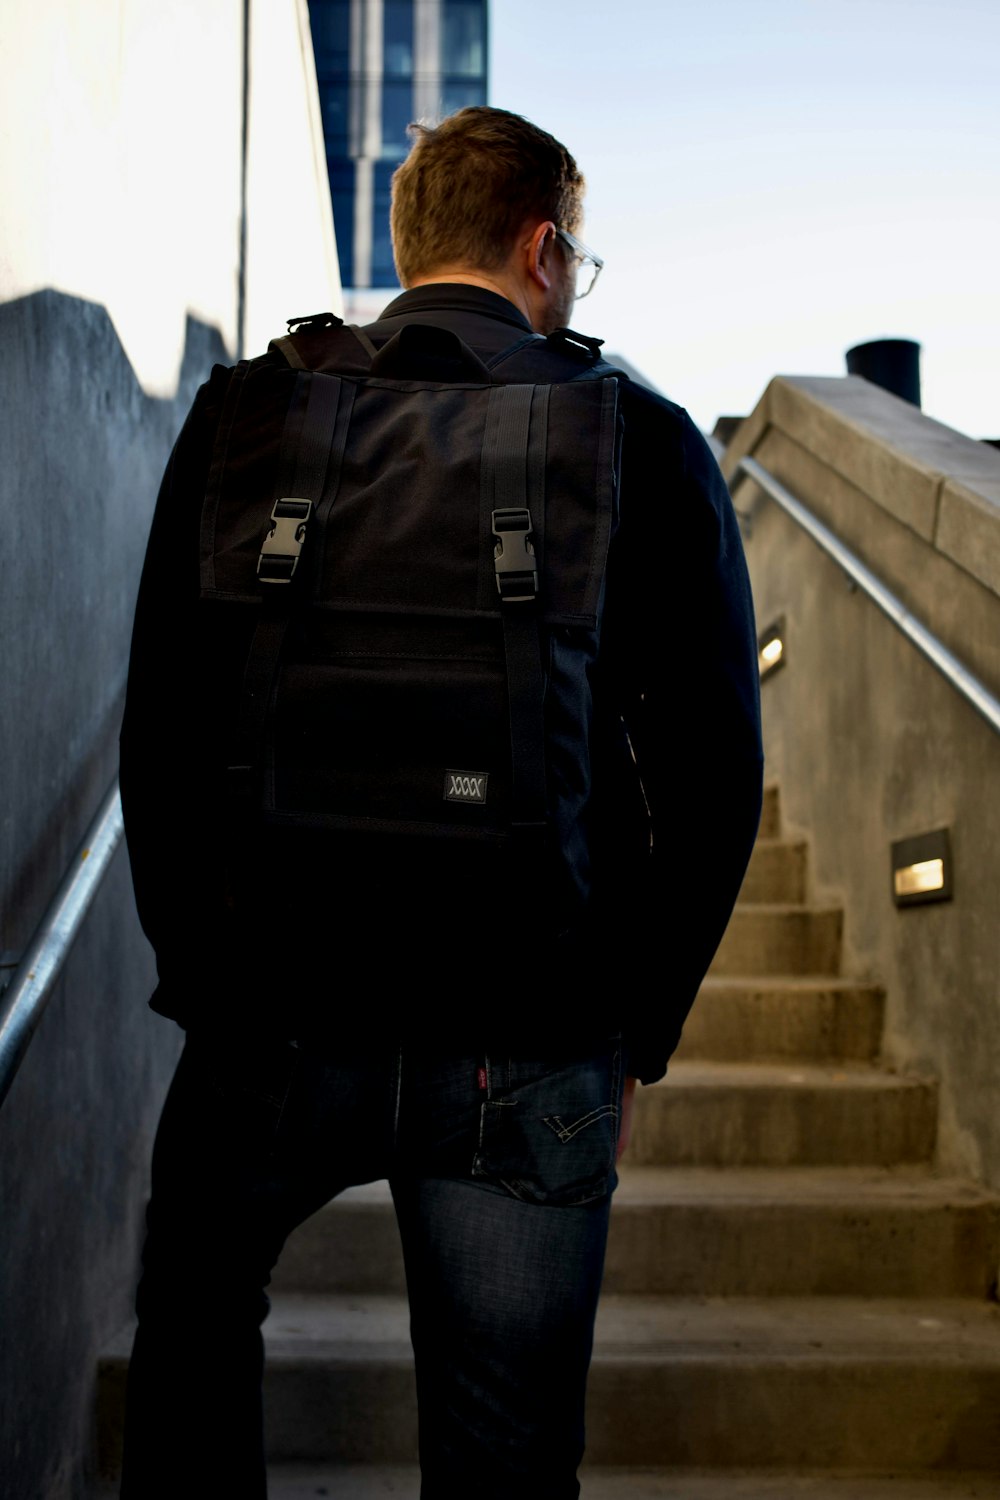 man in black jacket and blue denim jeans with black backpack standing on stairs during daytime